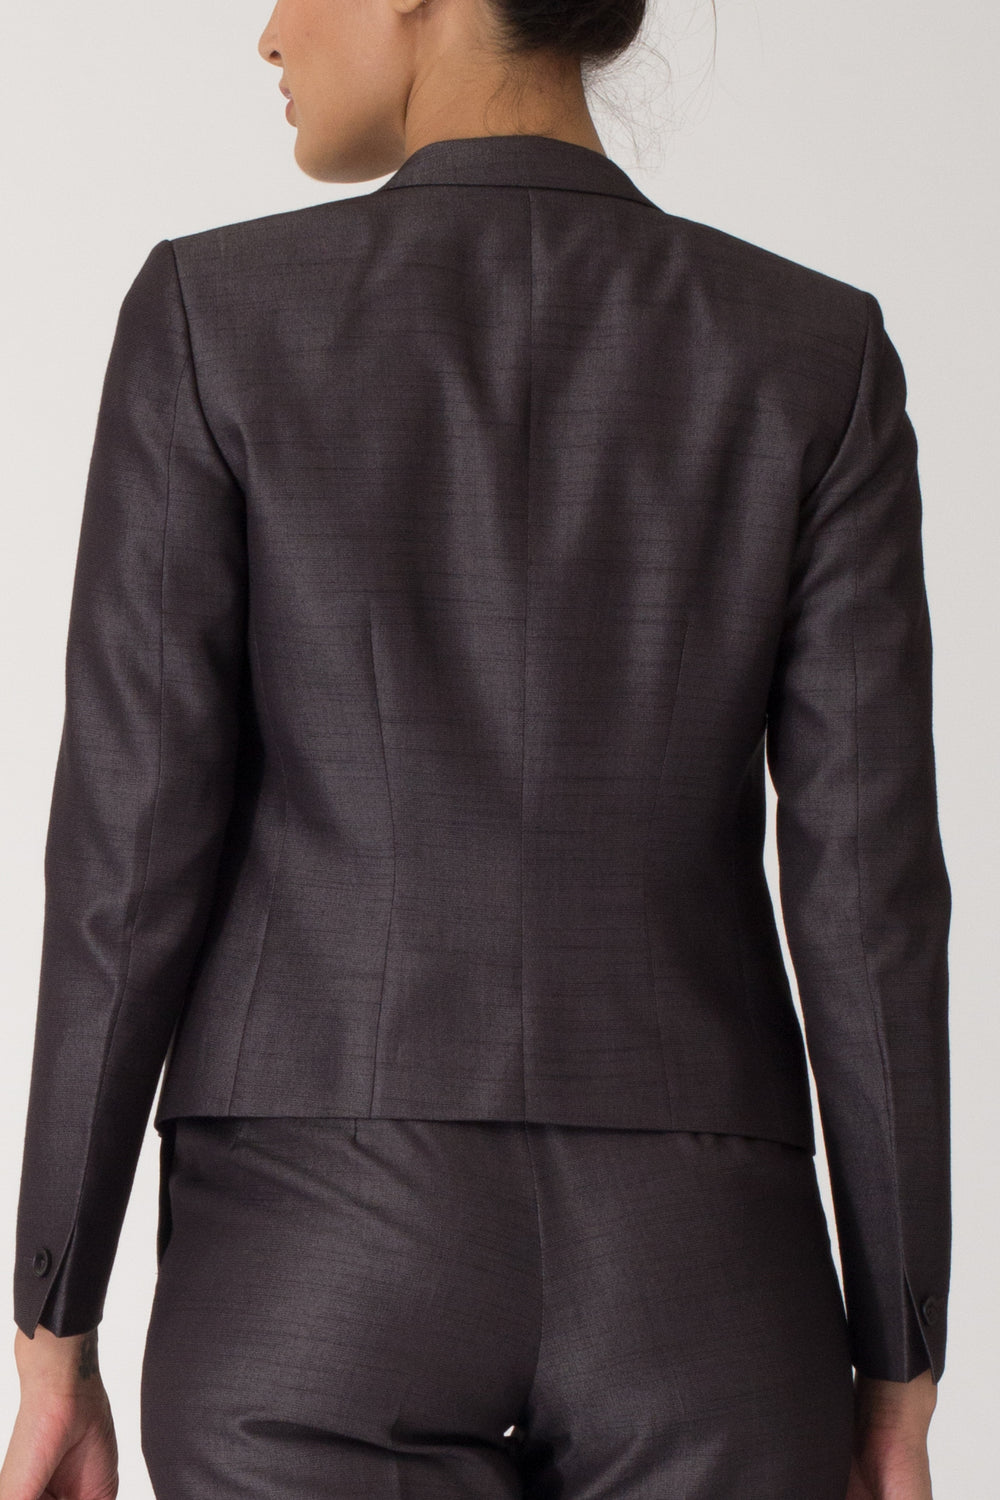 Dark Grey Formal Blazer Suit for work. Buy stylish office suits and professional looks online at www.intermod.in